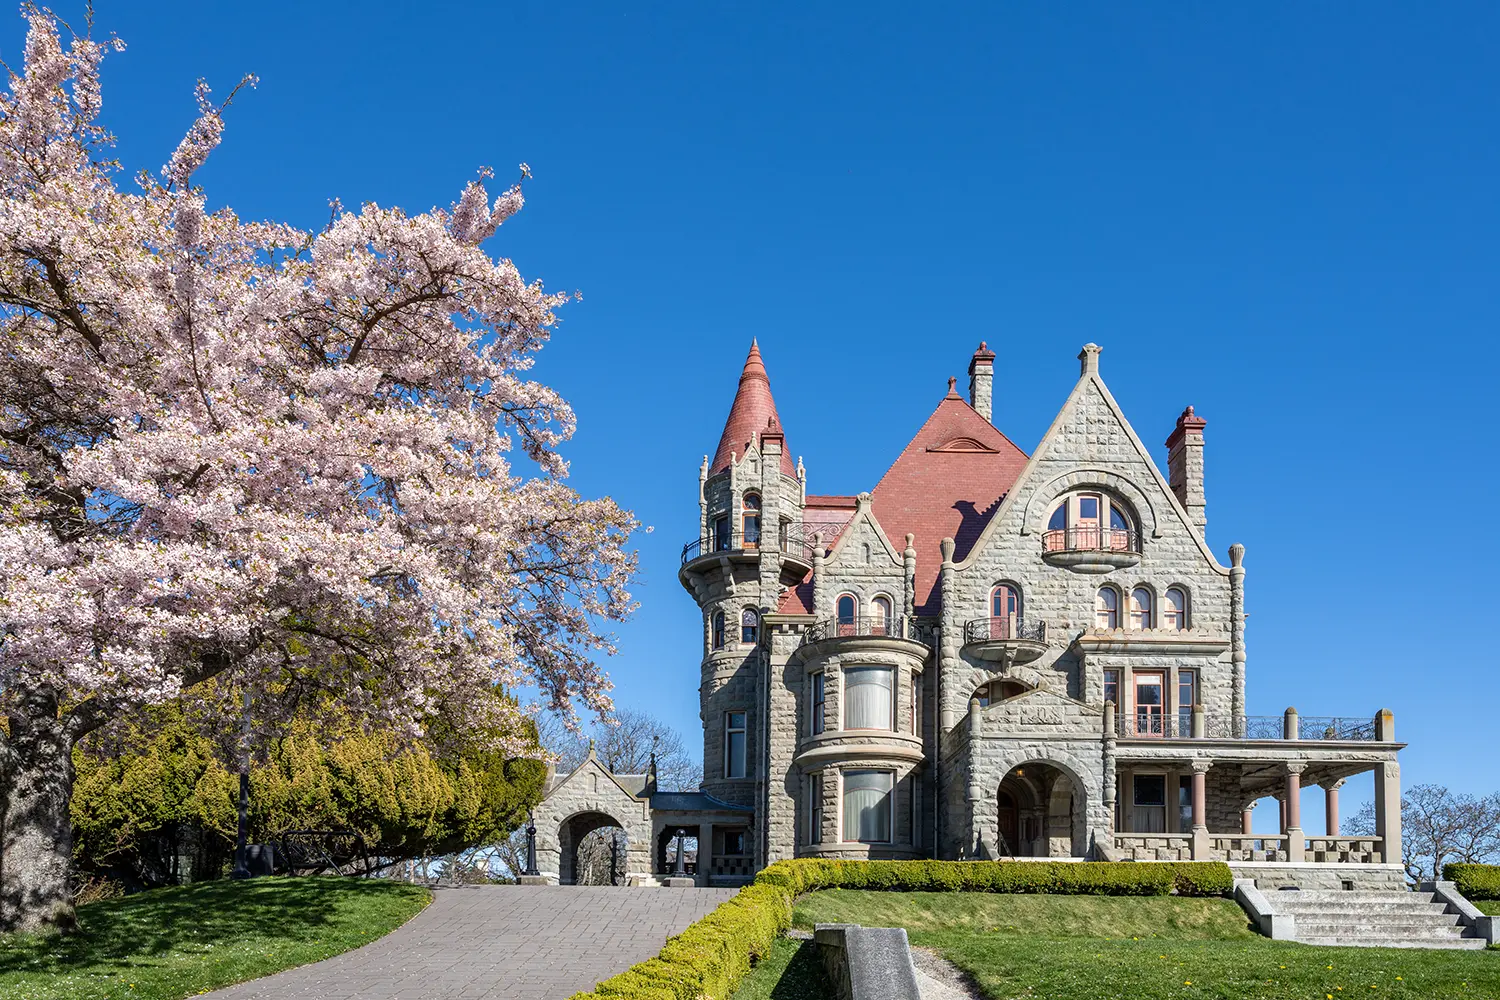 Craigdarroch Castle exterior with full bloom cherry blossom during springtime season. Victoria, BC, Canada.